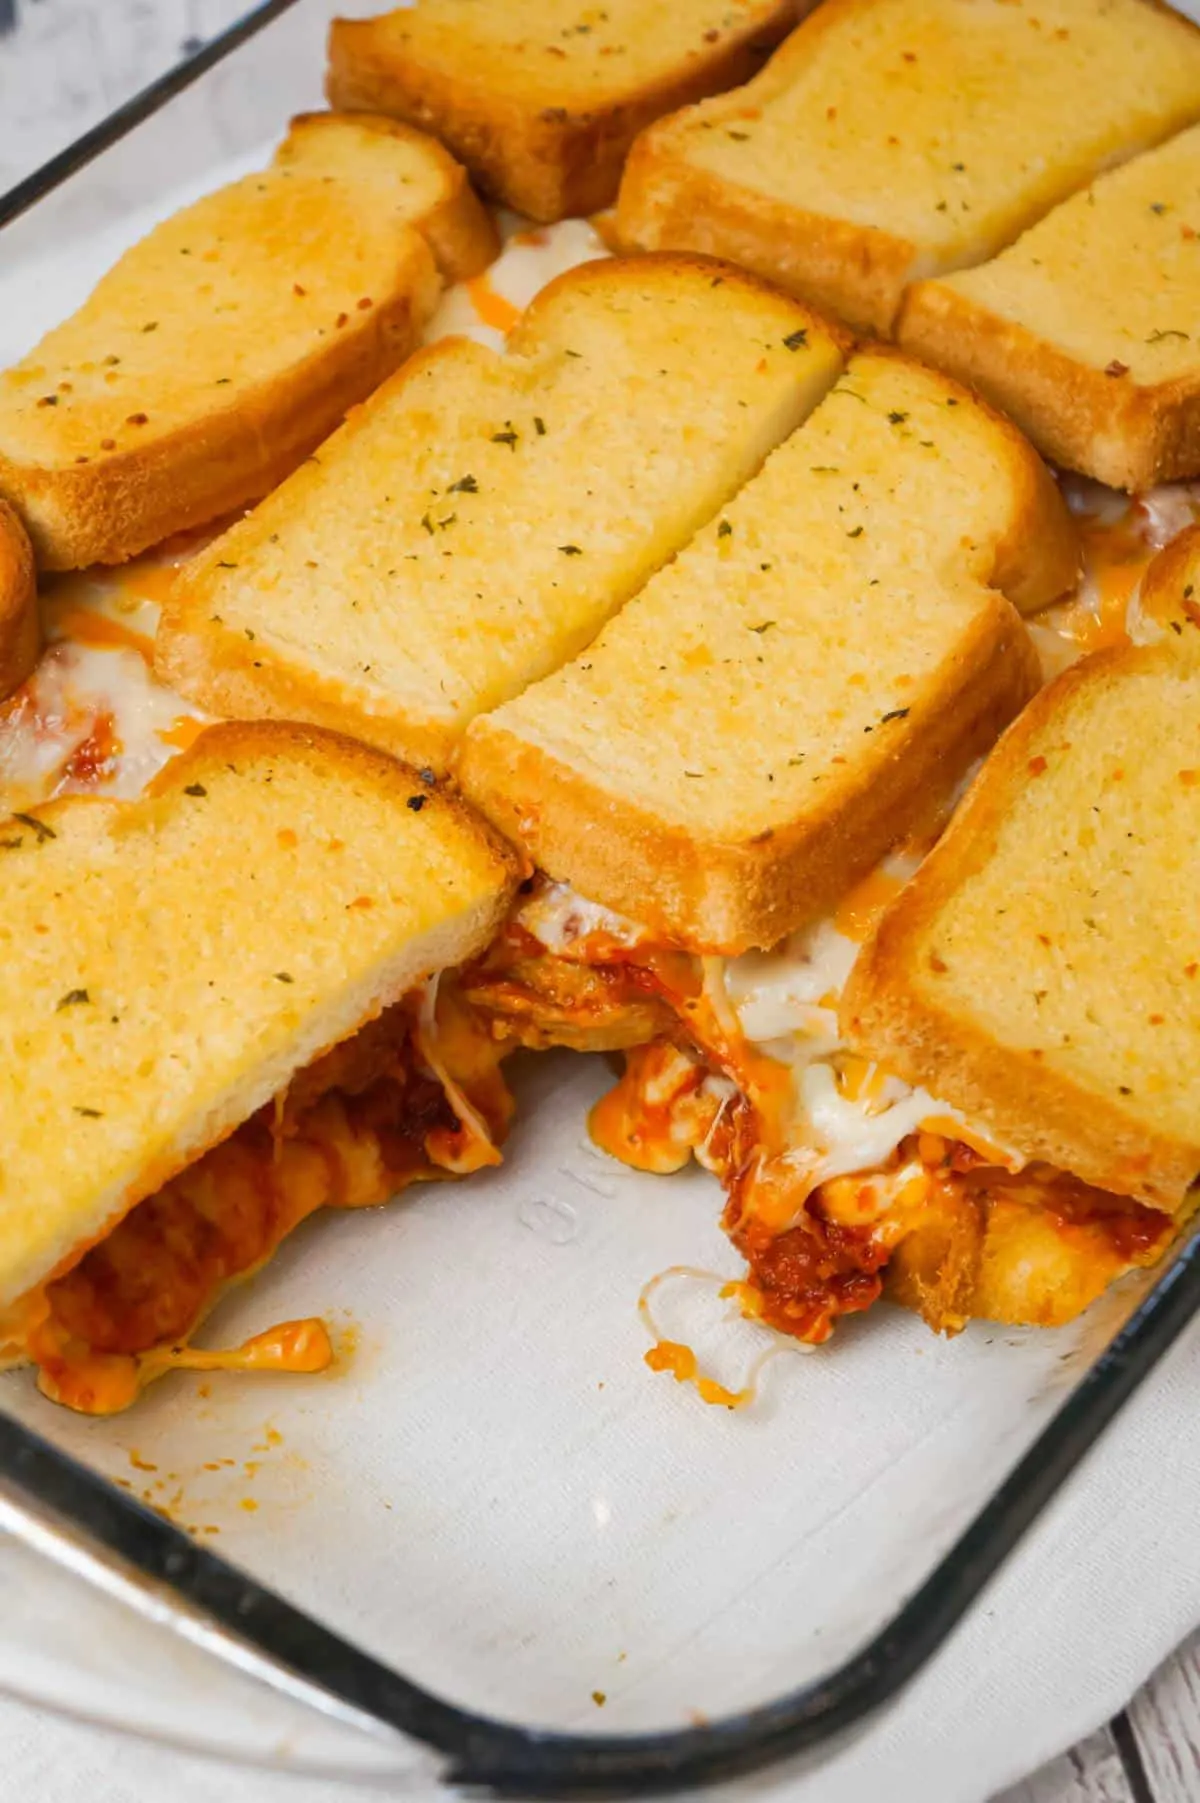 Meatball Sub Grilled Cheese Casserole is an easy casserole recipe made with Italian style meatballs, marinara sauce and loaded with cheese all sandwiched between layers of garlic toast.